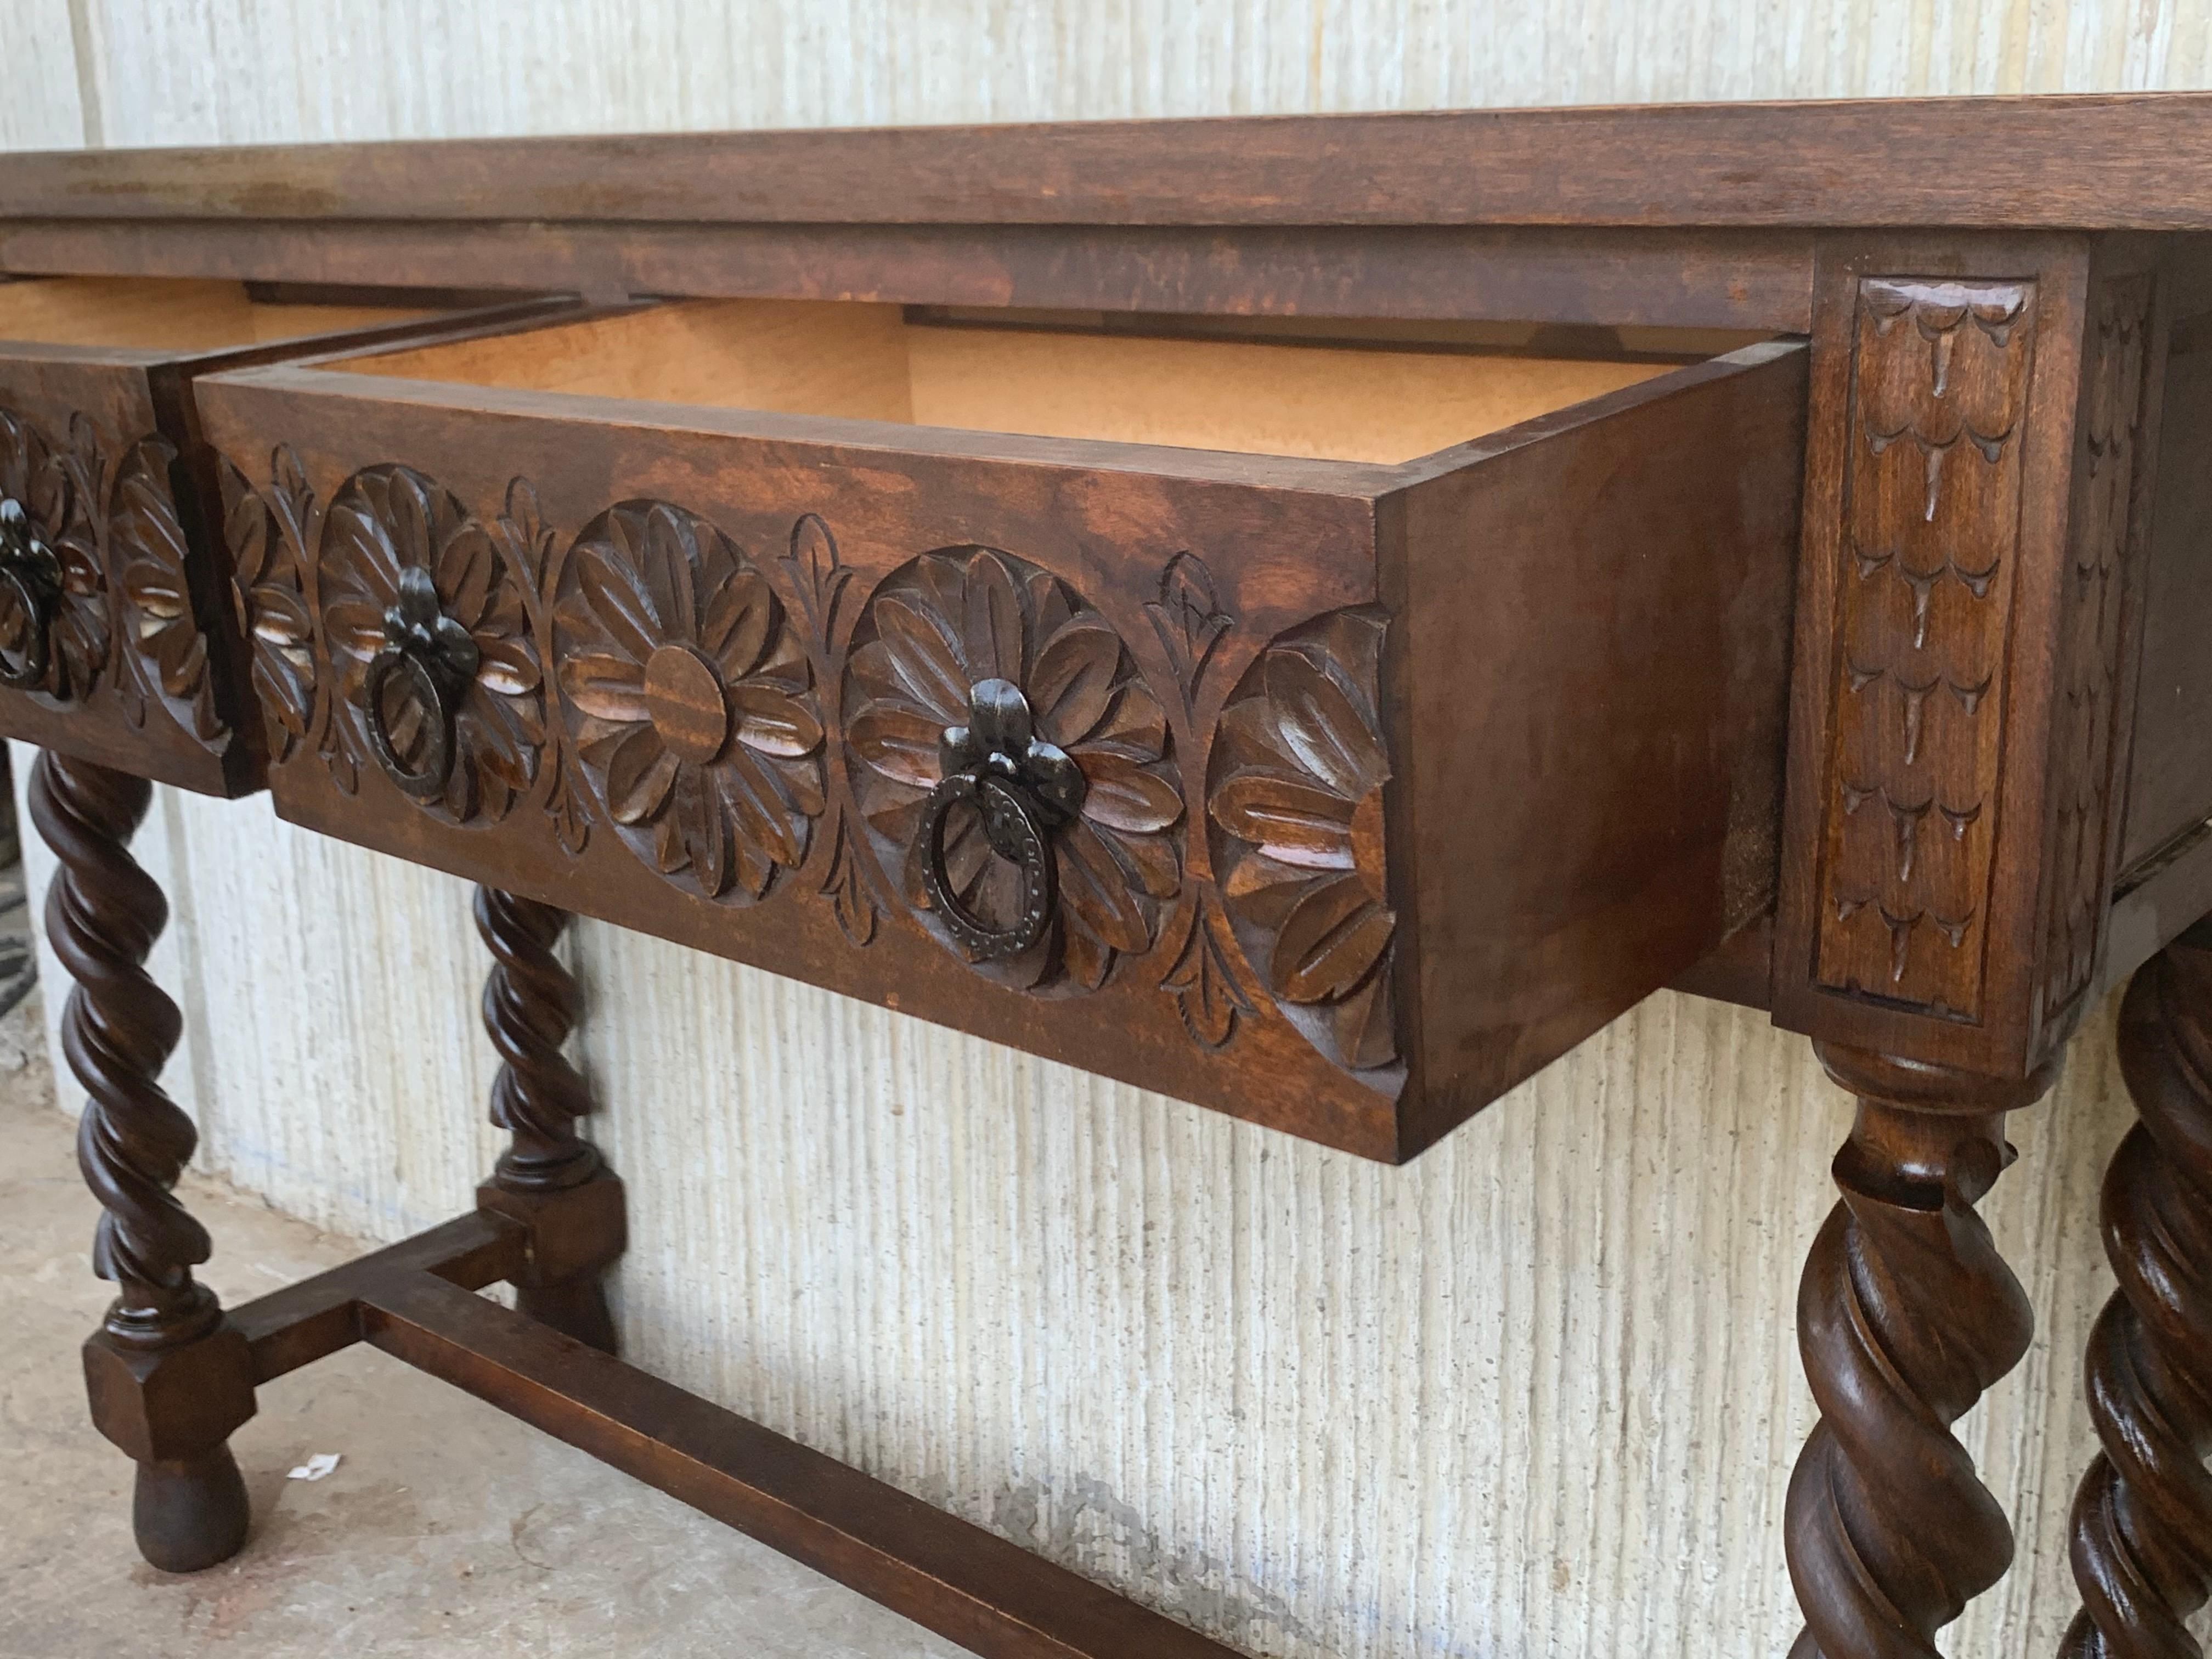 20th Century Spanish Tuscan Console Table with Two Drawers and Solomonic Legs 1